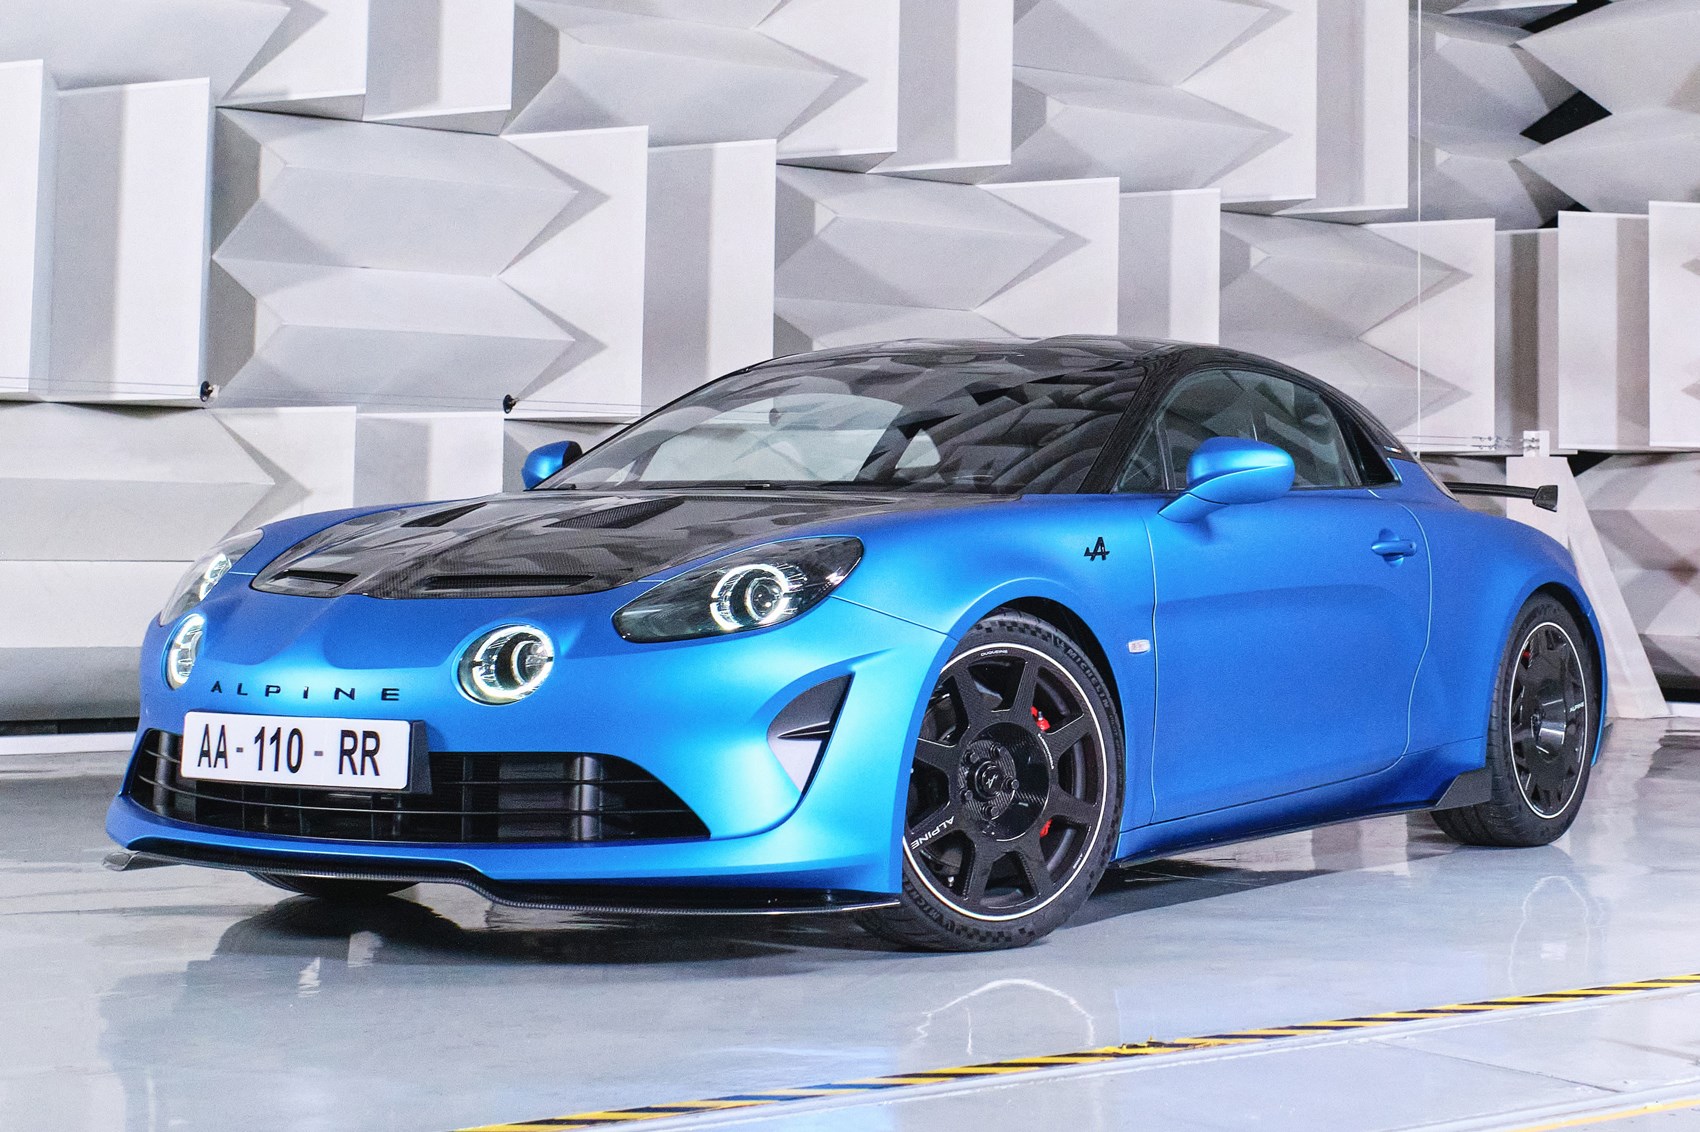 Bad News: The Awesome New Alpine A110 Isn't Coming to the US